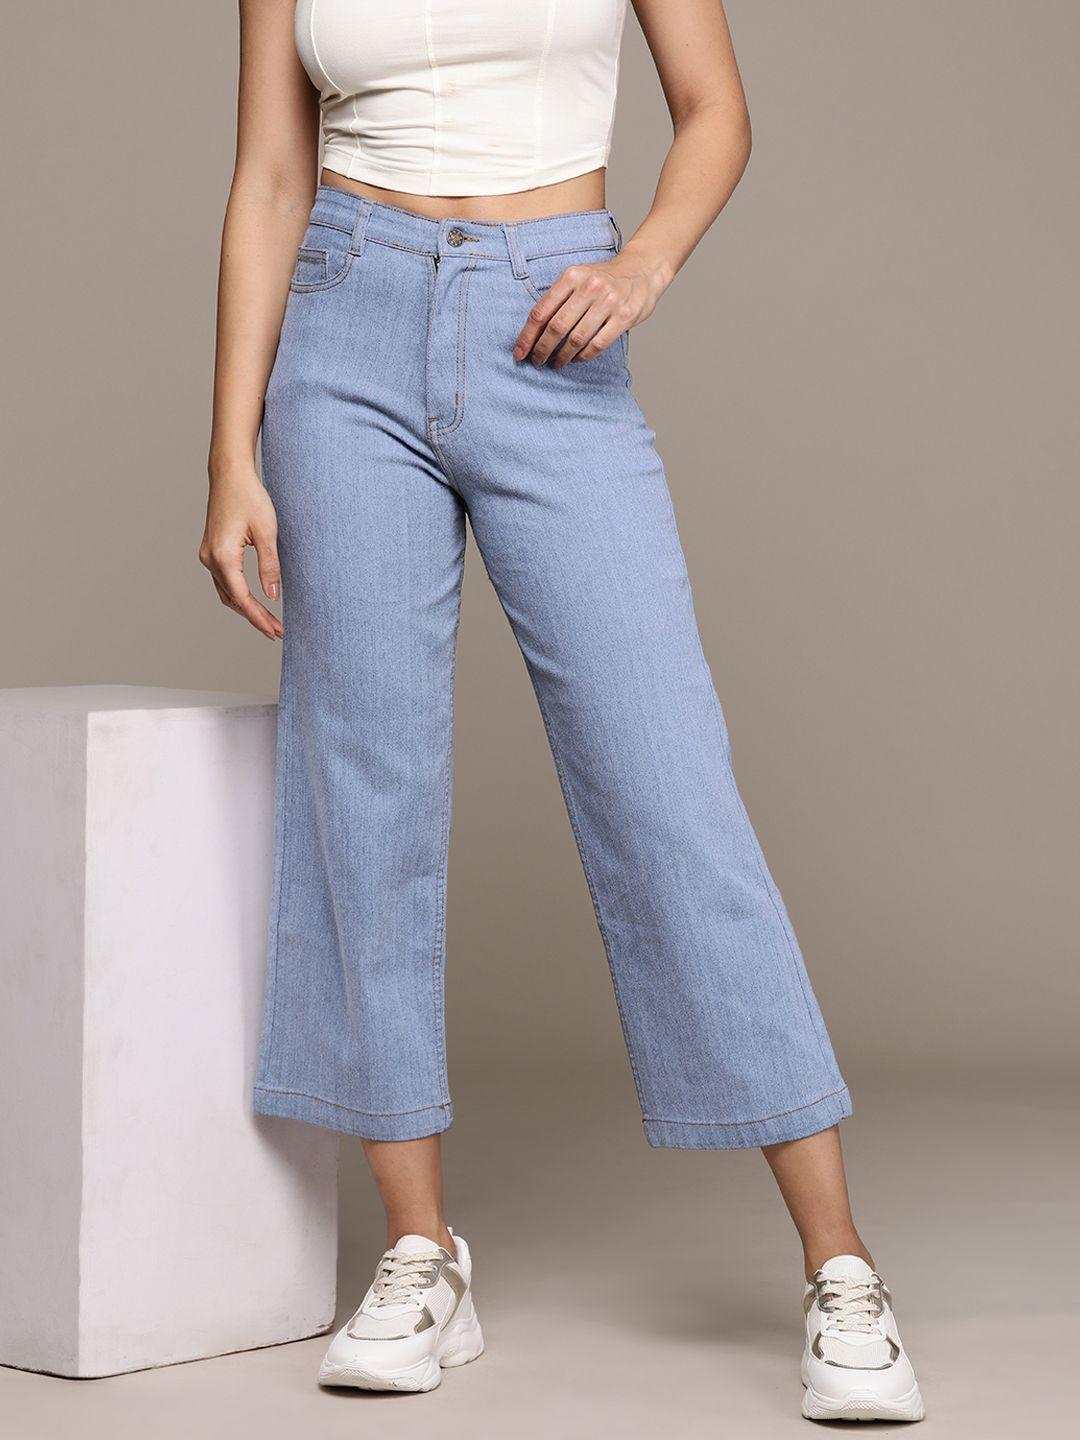 roadster-flared-high-rise-stretchable-jeans